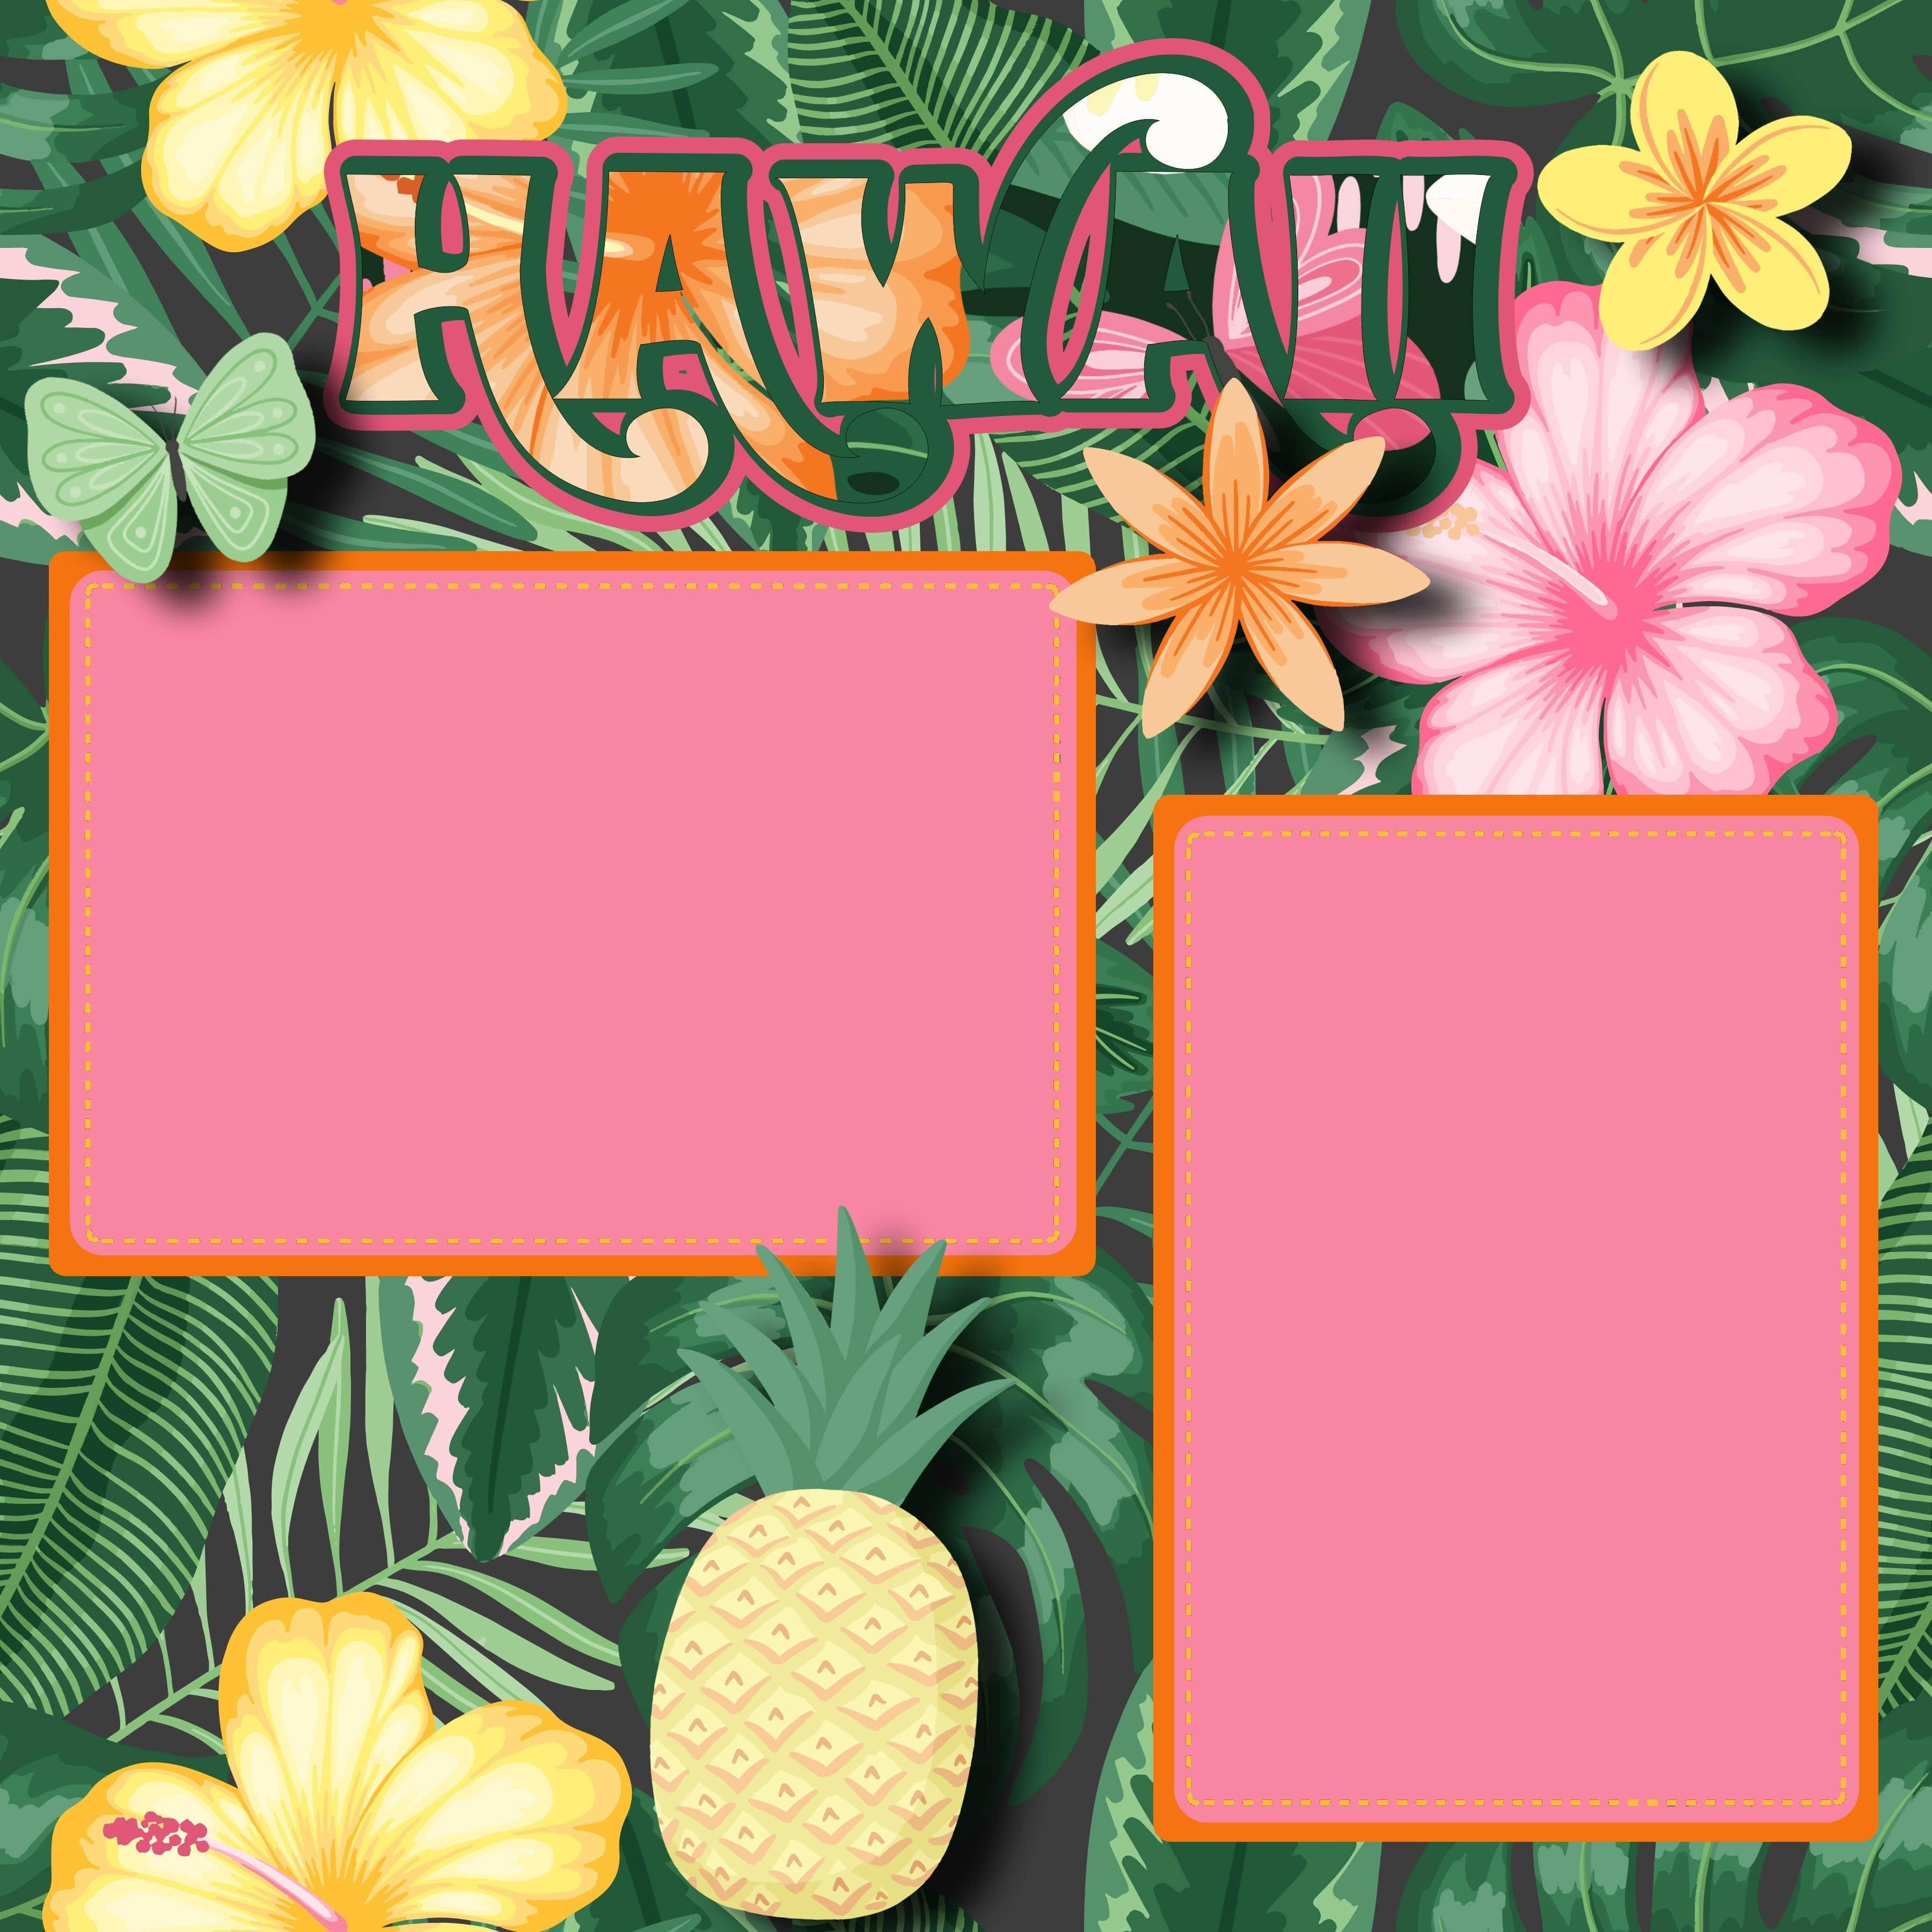 Hawaii Tropical Hibiscus (2) - 12 x 12 Premade, Printed Scrapbook Pages by SSC Designs - Scrapbook Supply Companies